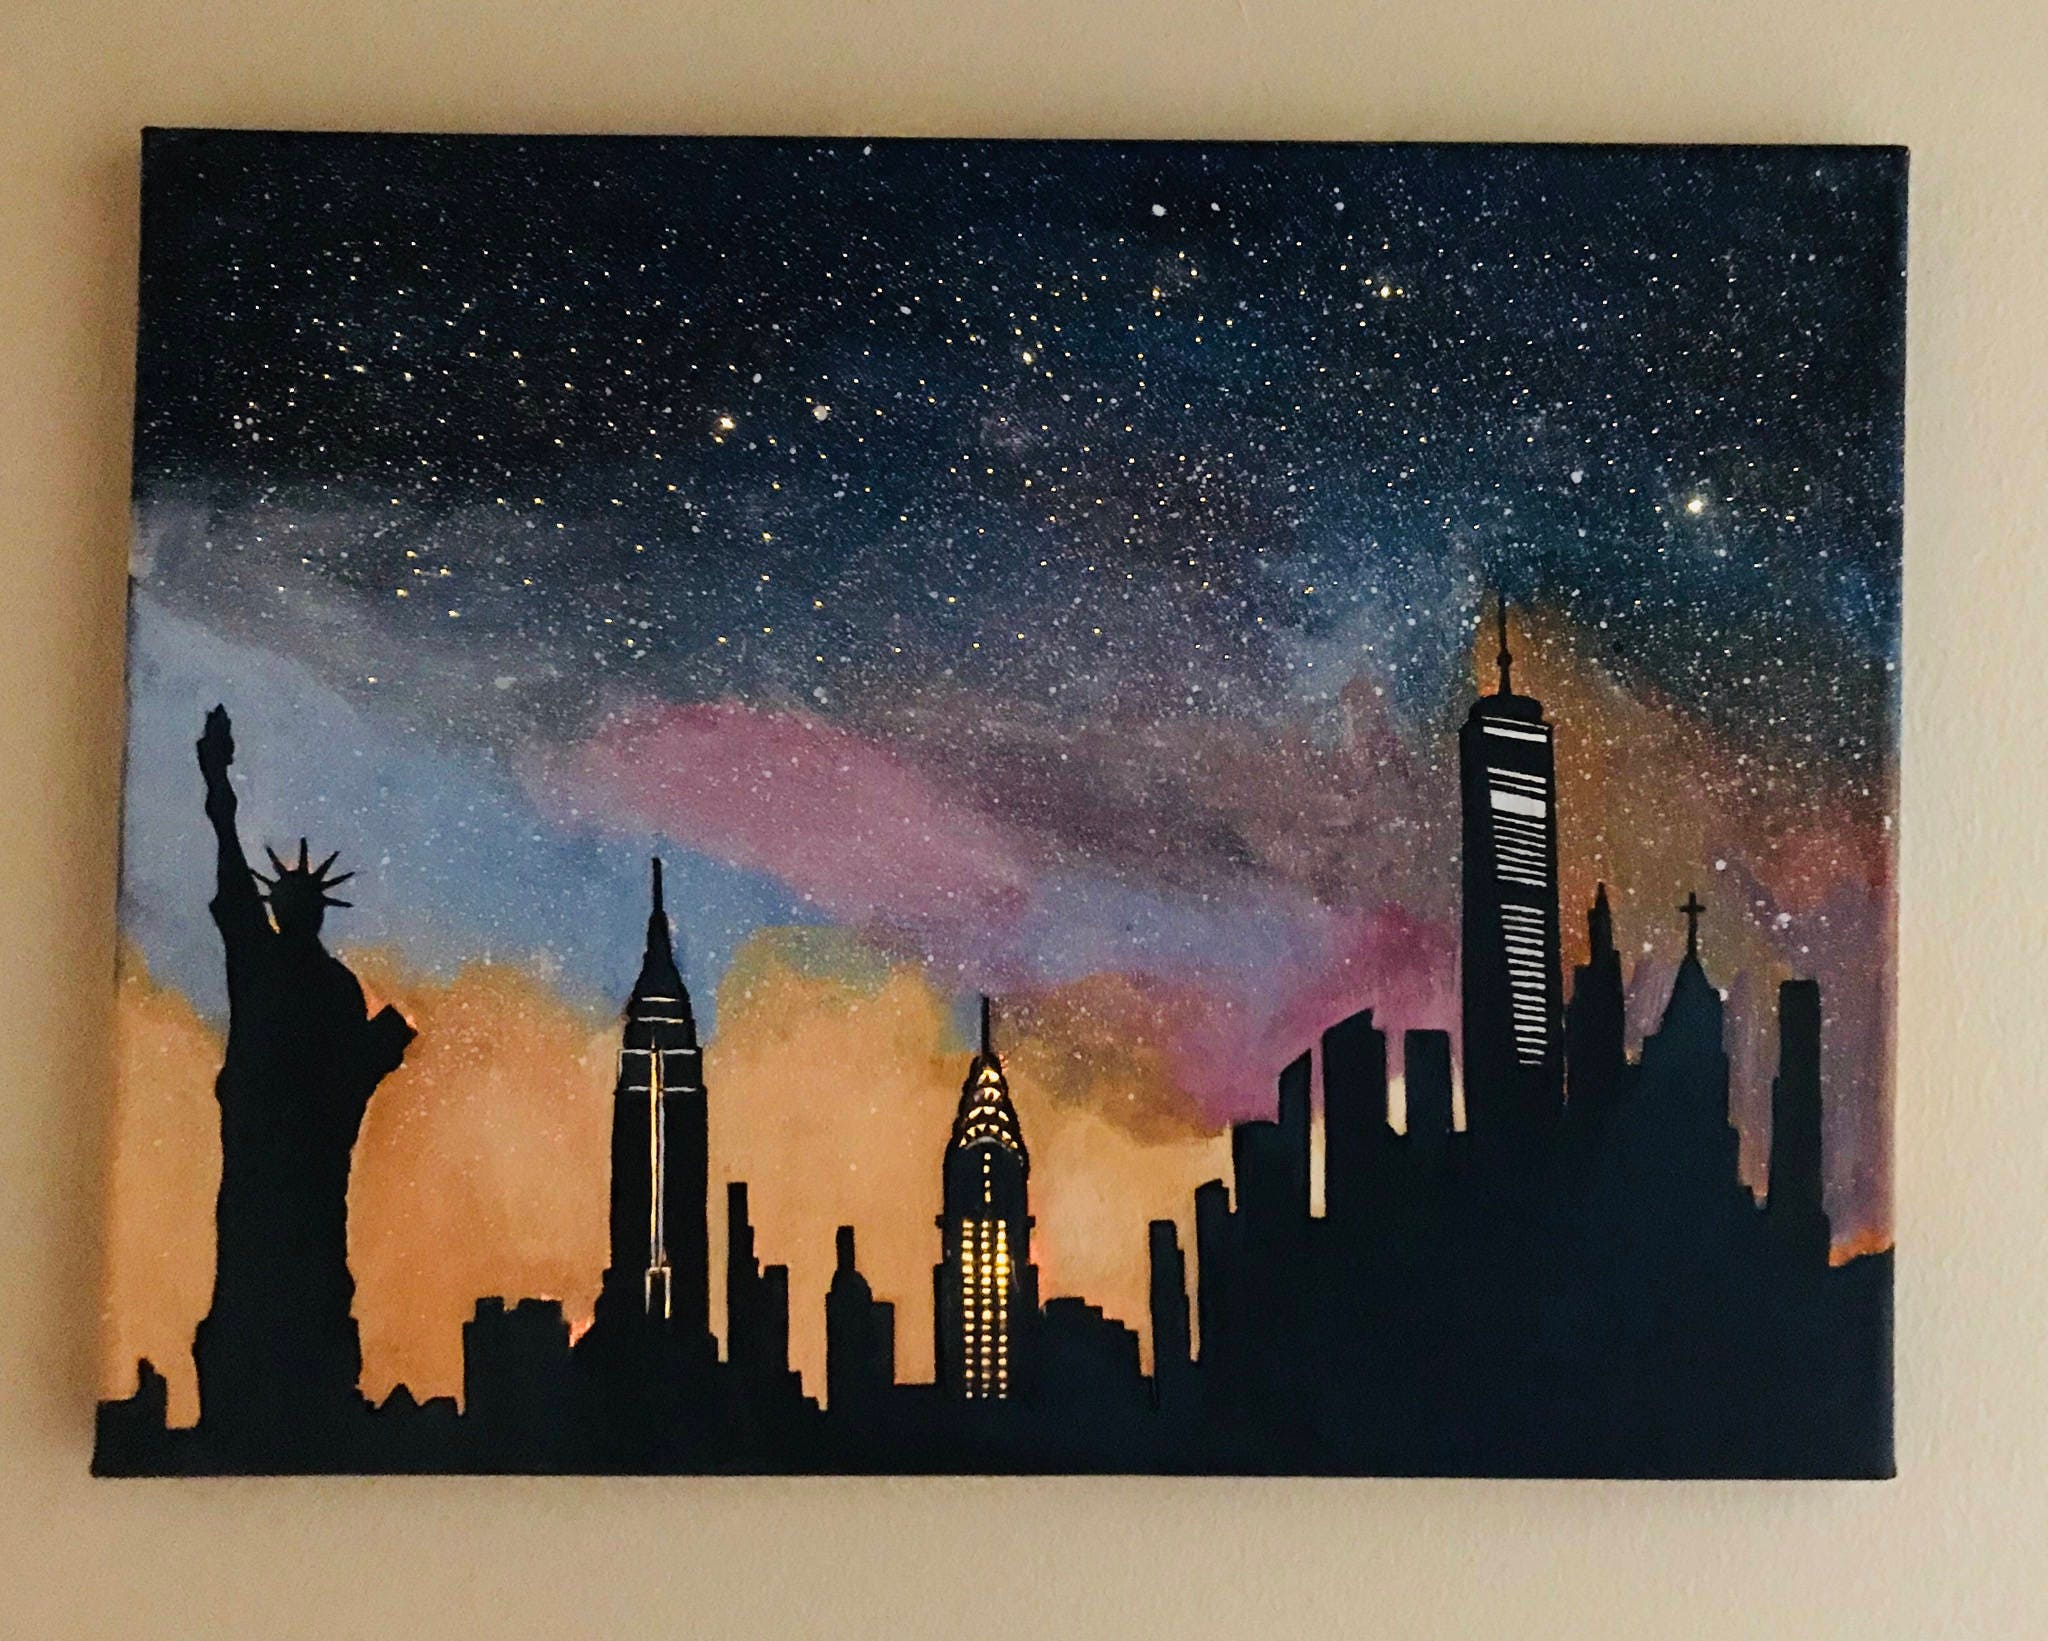 Acrylic Paint Sets for sale in New York, New York, Facebook Marketplace